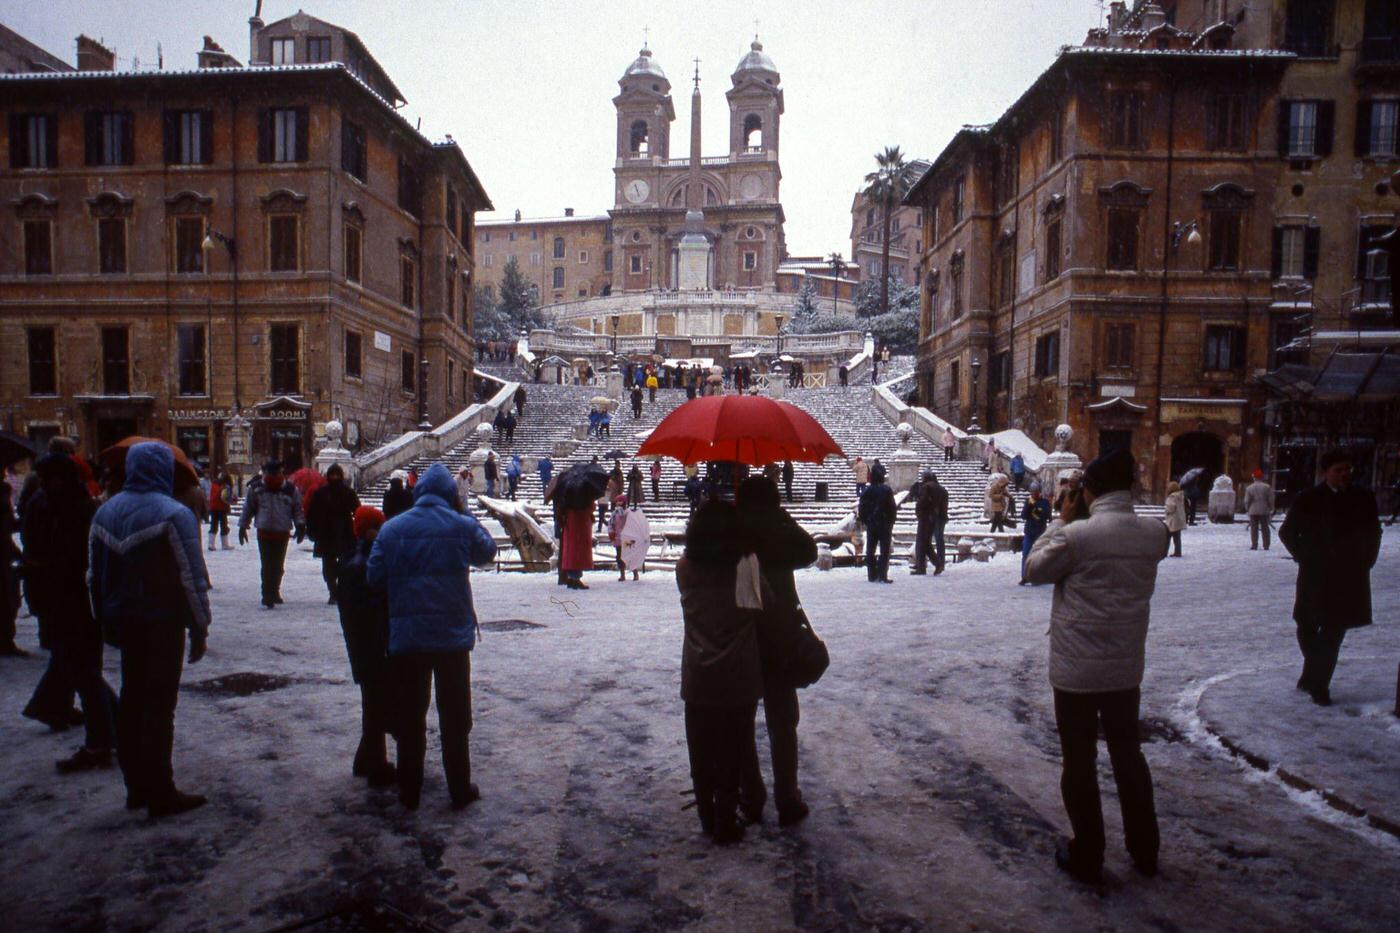 Snowy Spanish Steps and Piazza di Spagna in Rome, 1985